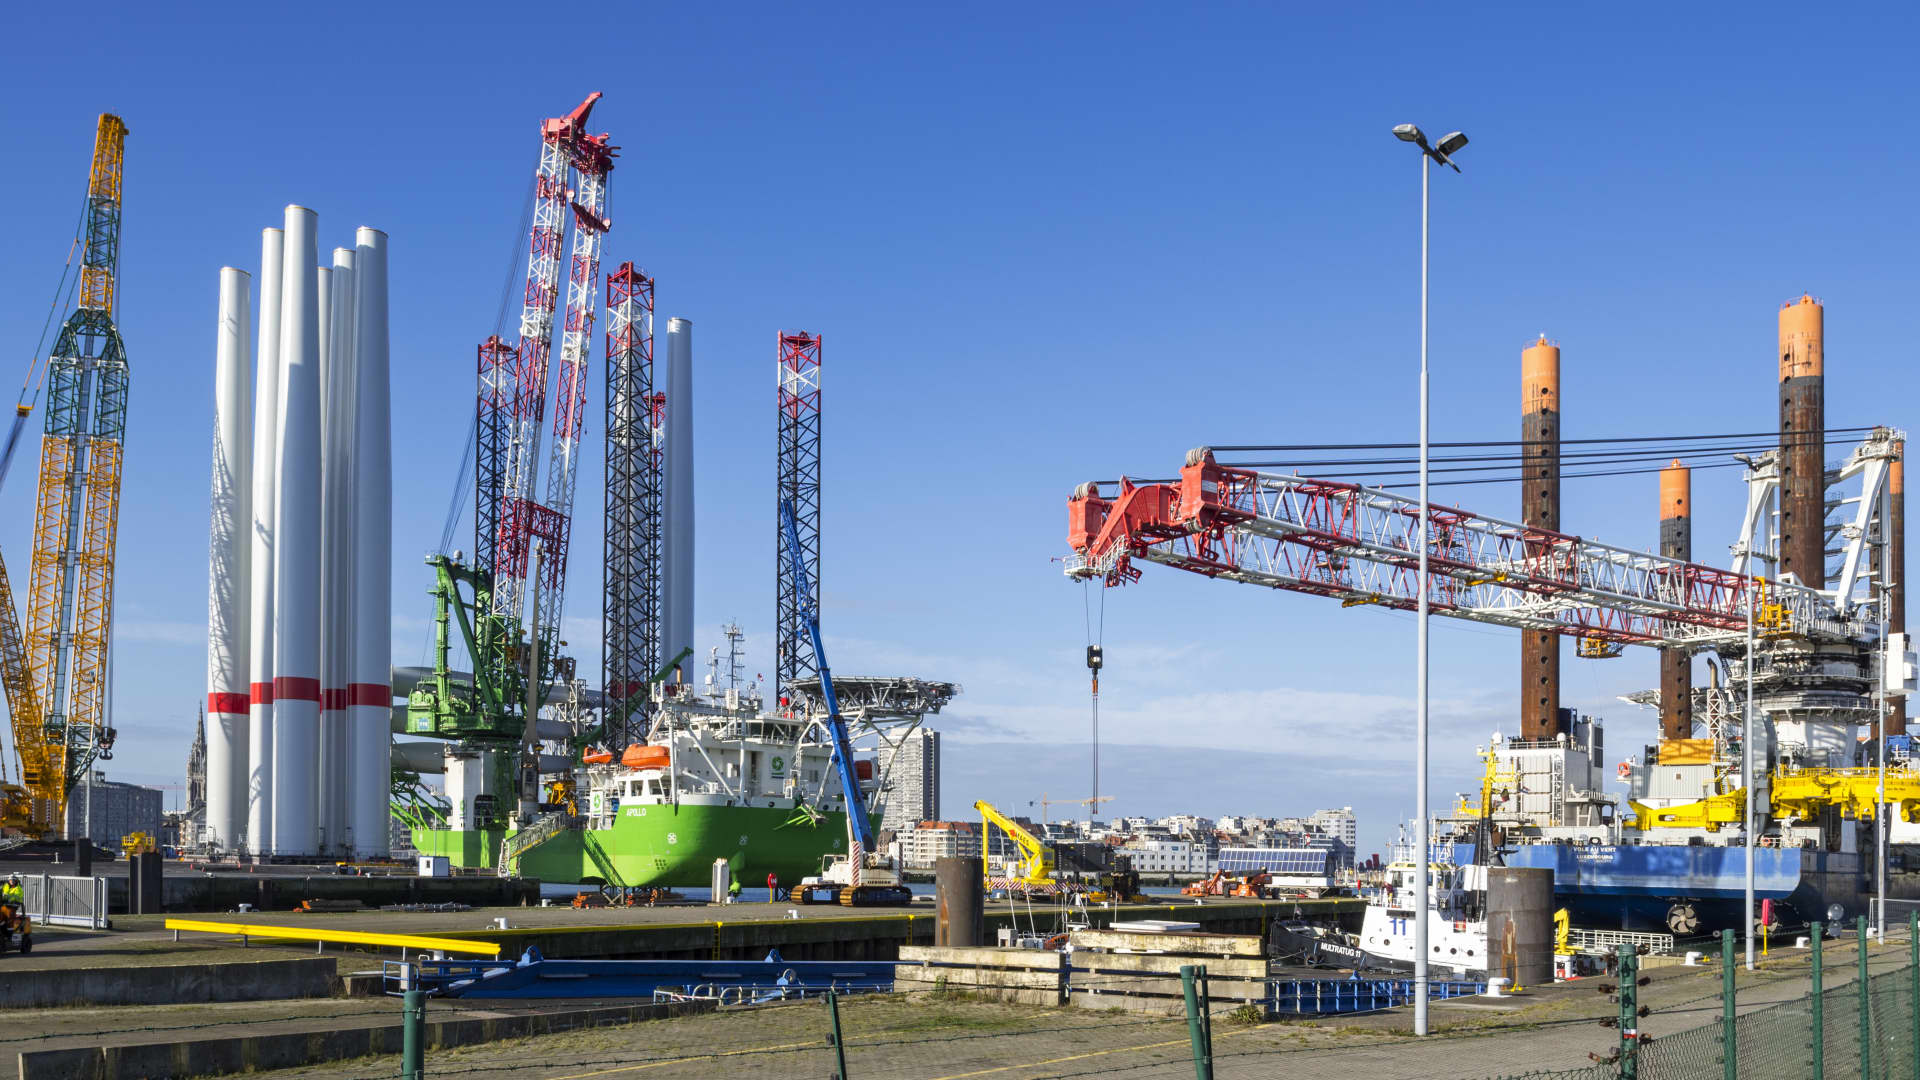 Installation vessels moored in Ostend, Belgium. Industry bodies from the wind energy sector are calling for significant investment in port infrastructure to help cope with the rapid expansion of wind farms.